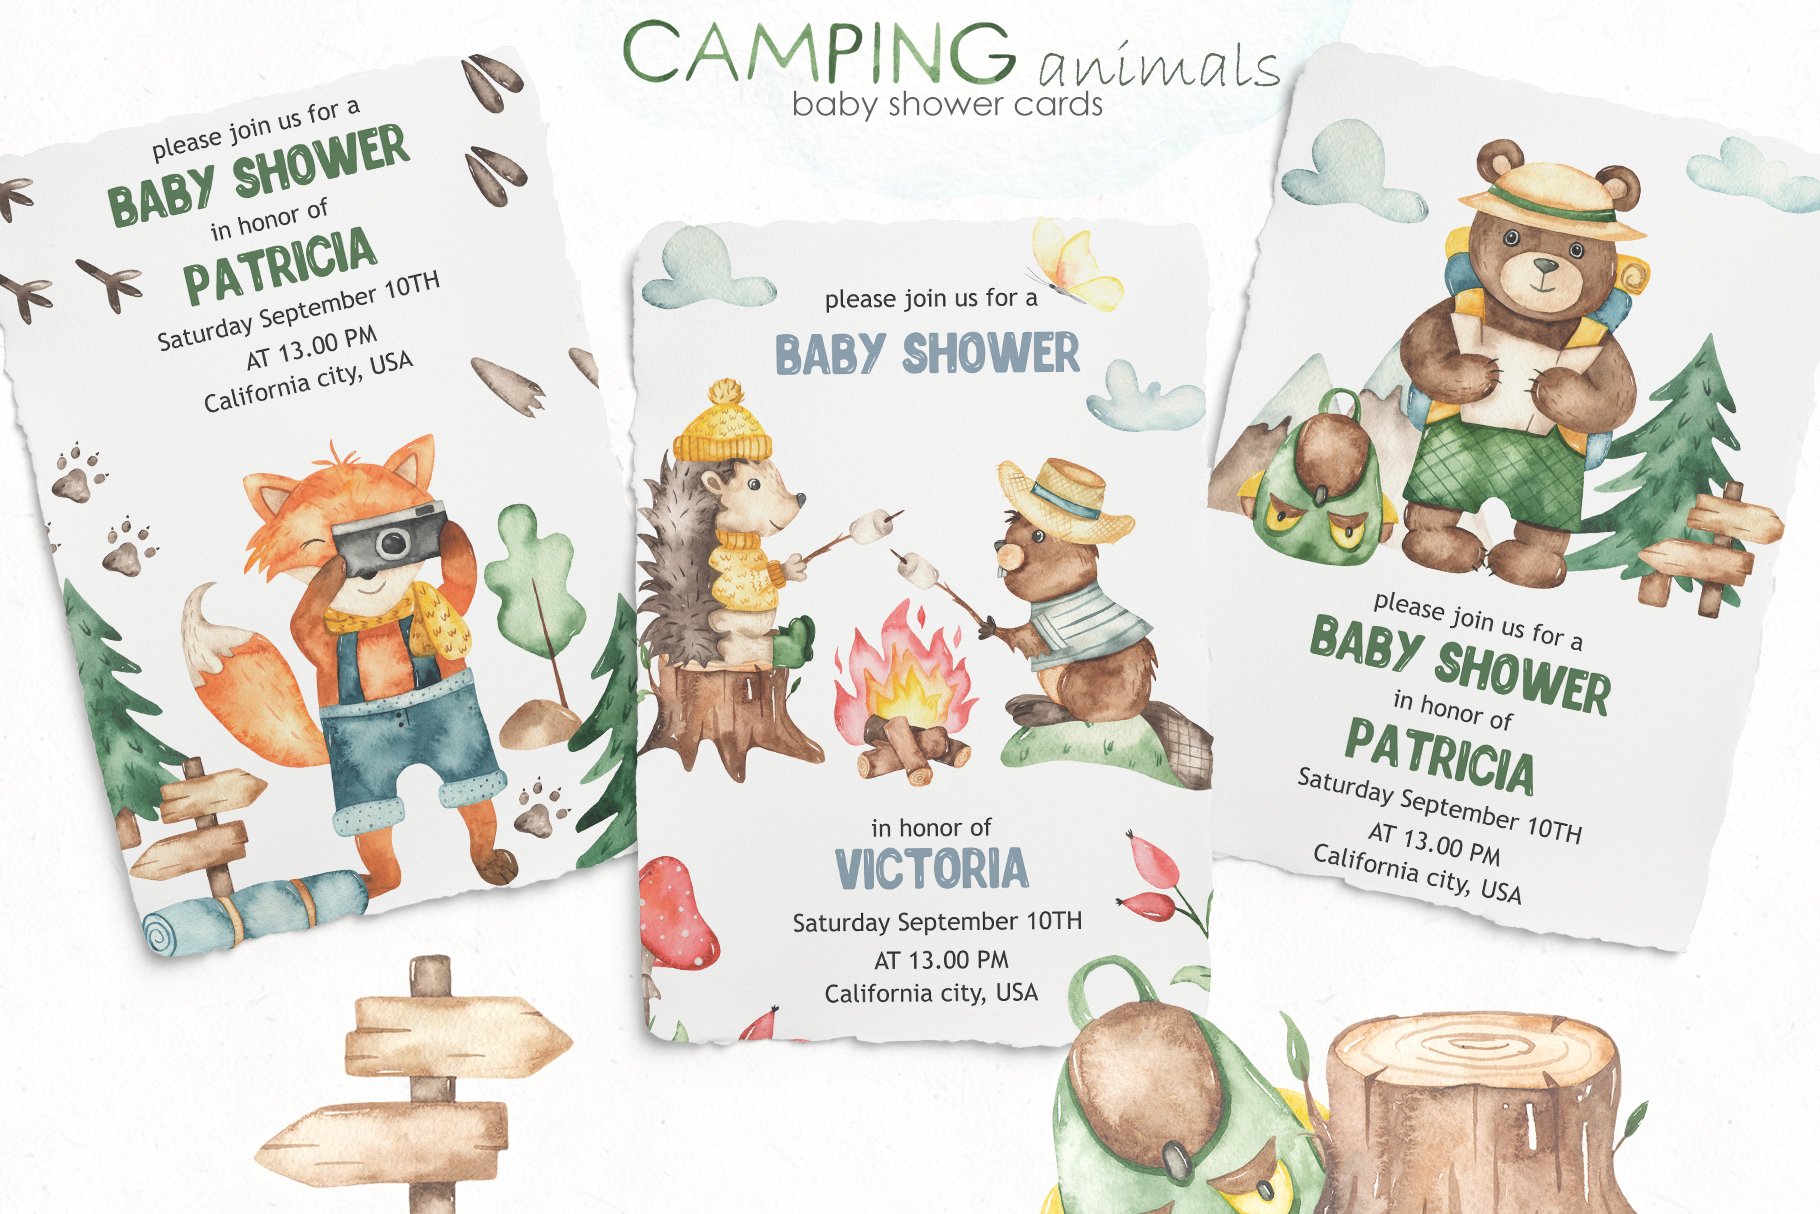 Cool camping watercolor cards.